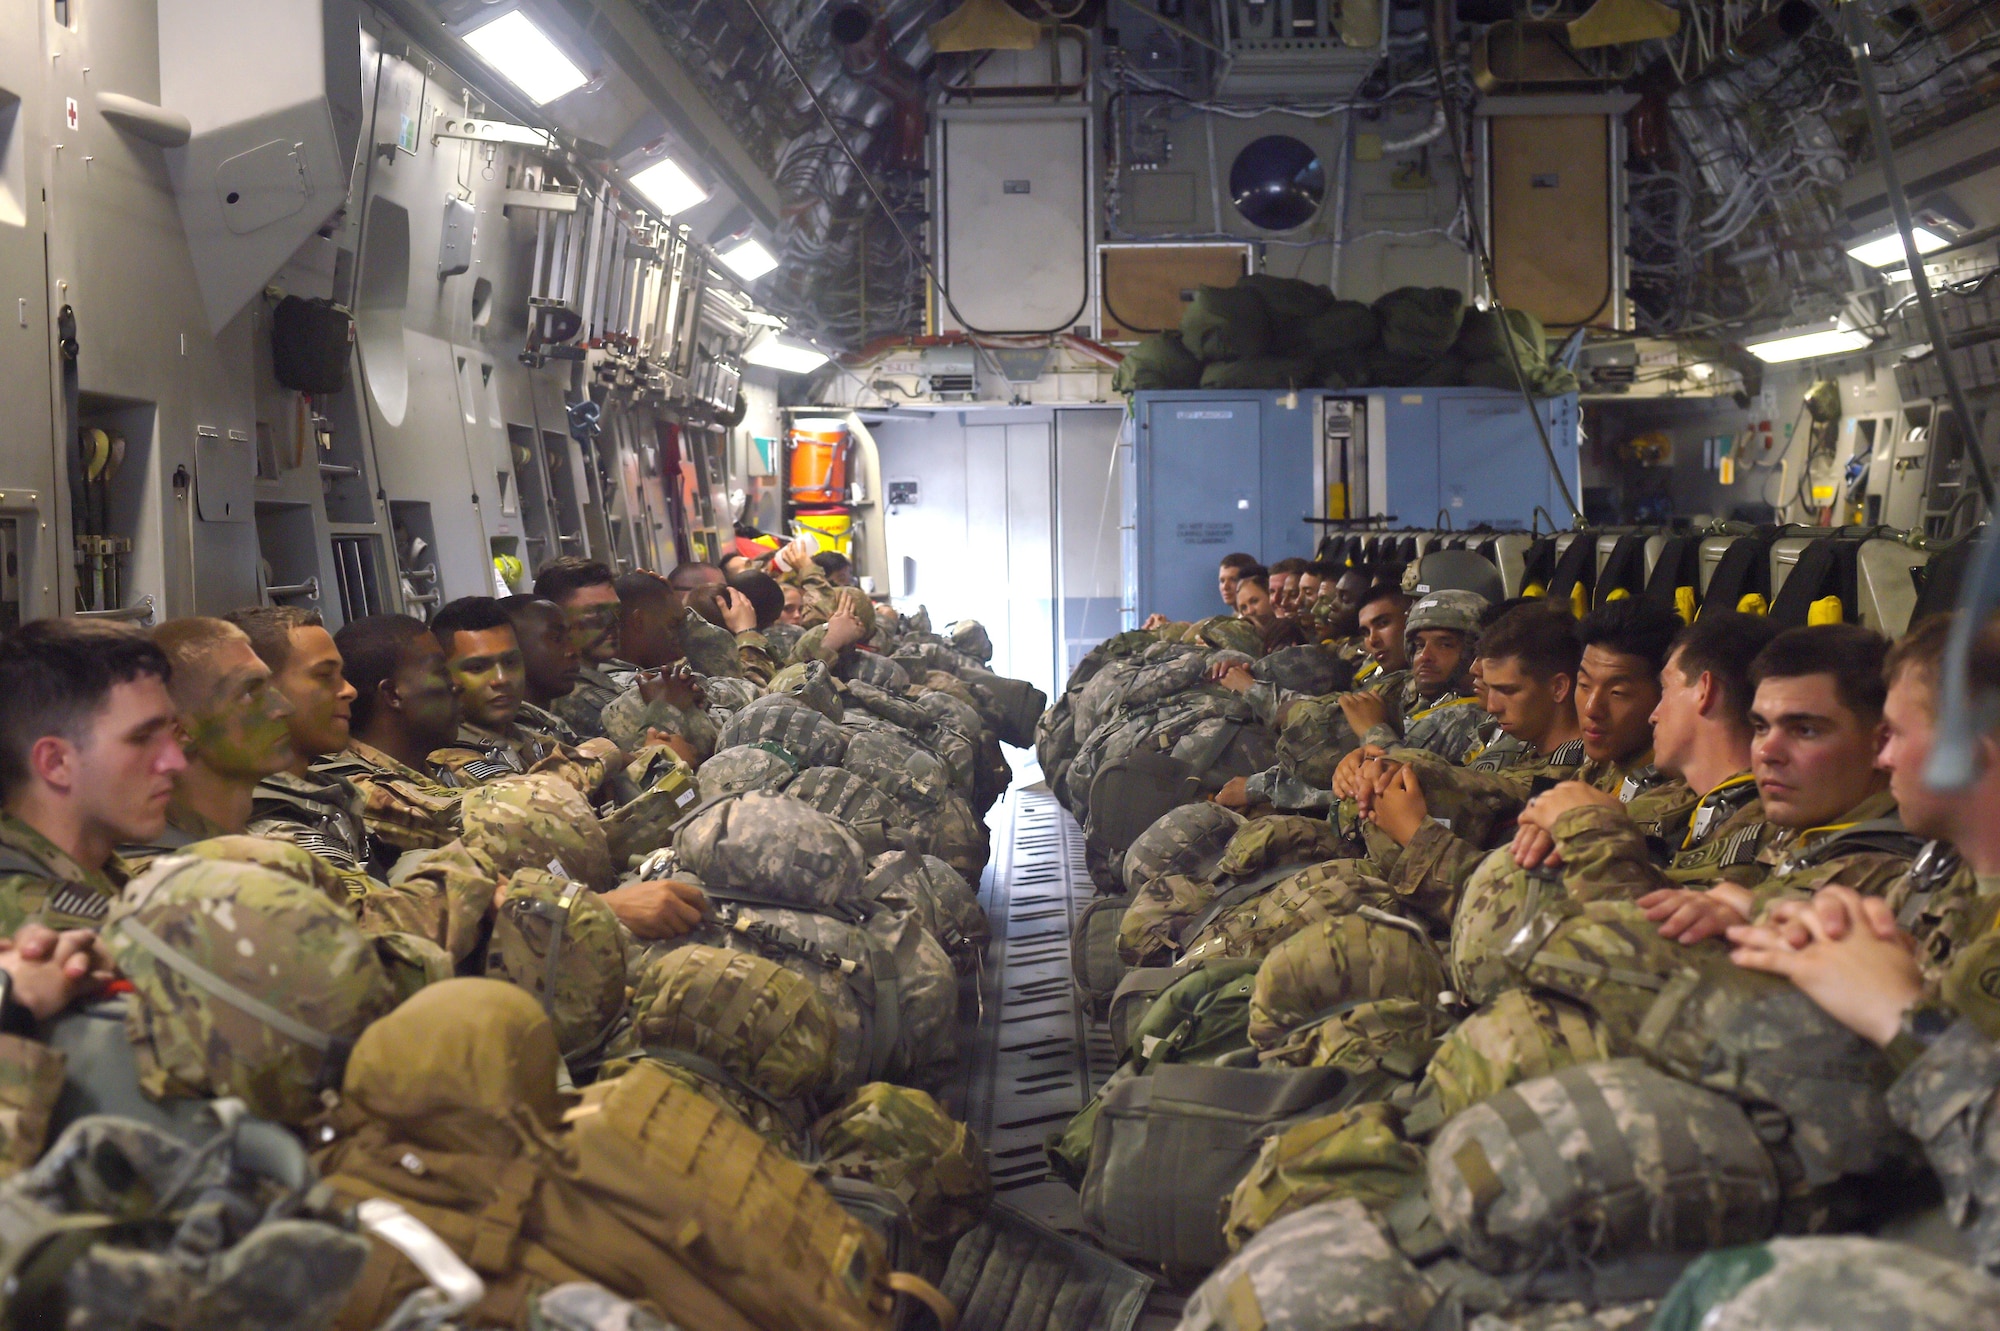 Soldiers with the 82nd Airborne Division sit inside a 62nd Airlift Wing C-17 Globemaster III at Pope Army Air Field, North Carolina, June 4, 2016. More than 90 Soldiers boarded the C-17 to conduct a static line parachute jump over the range. (U.S. Air Force photo/Staff Sgt. Naomi Shipley)